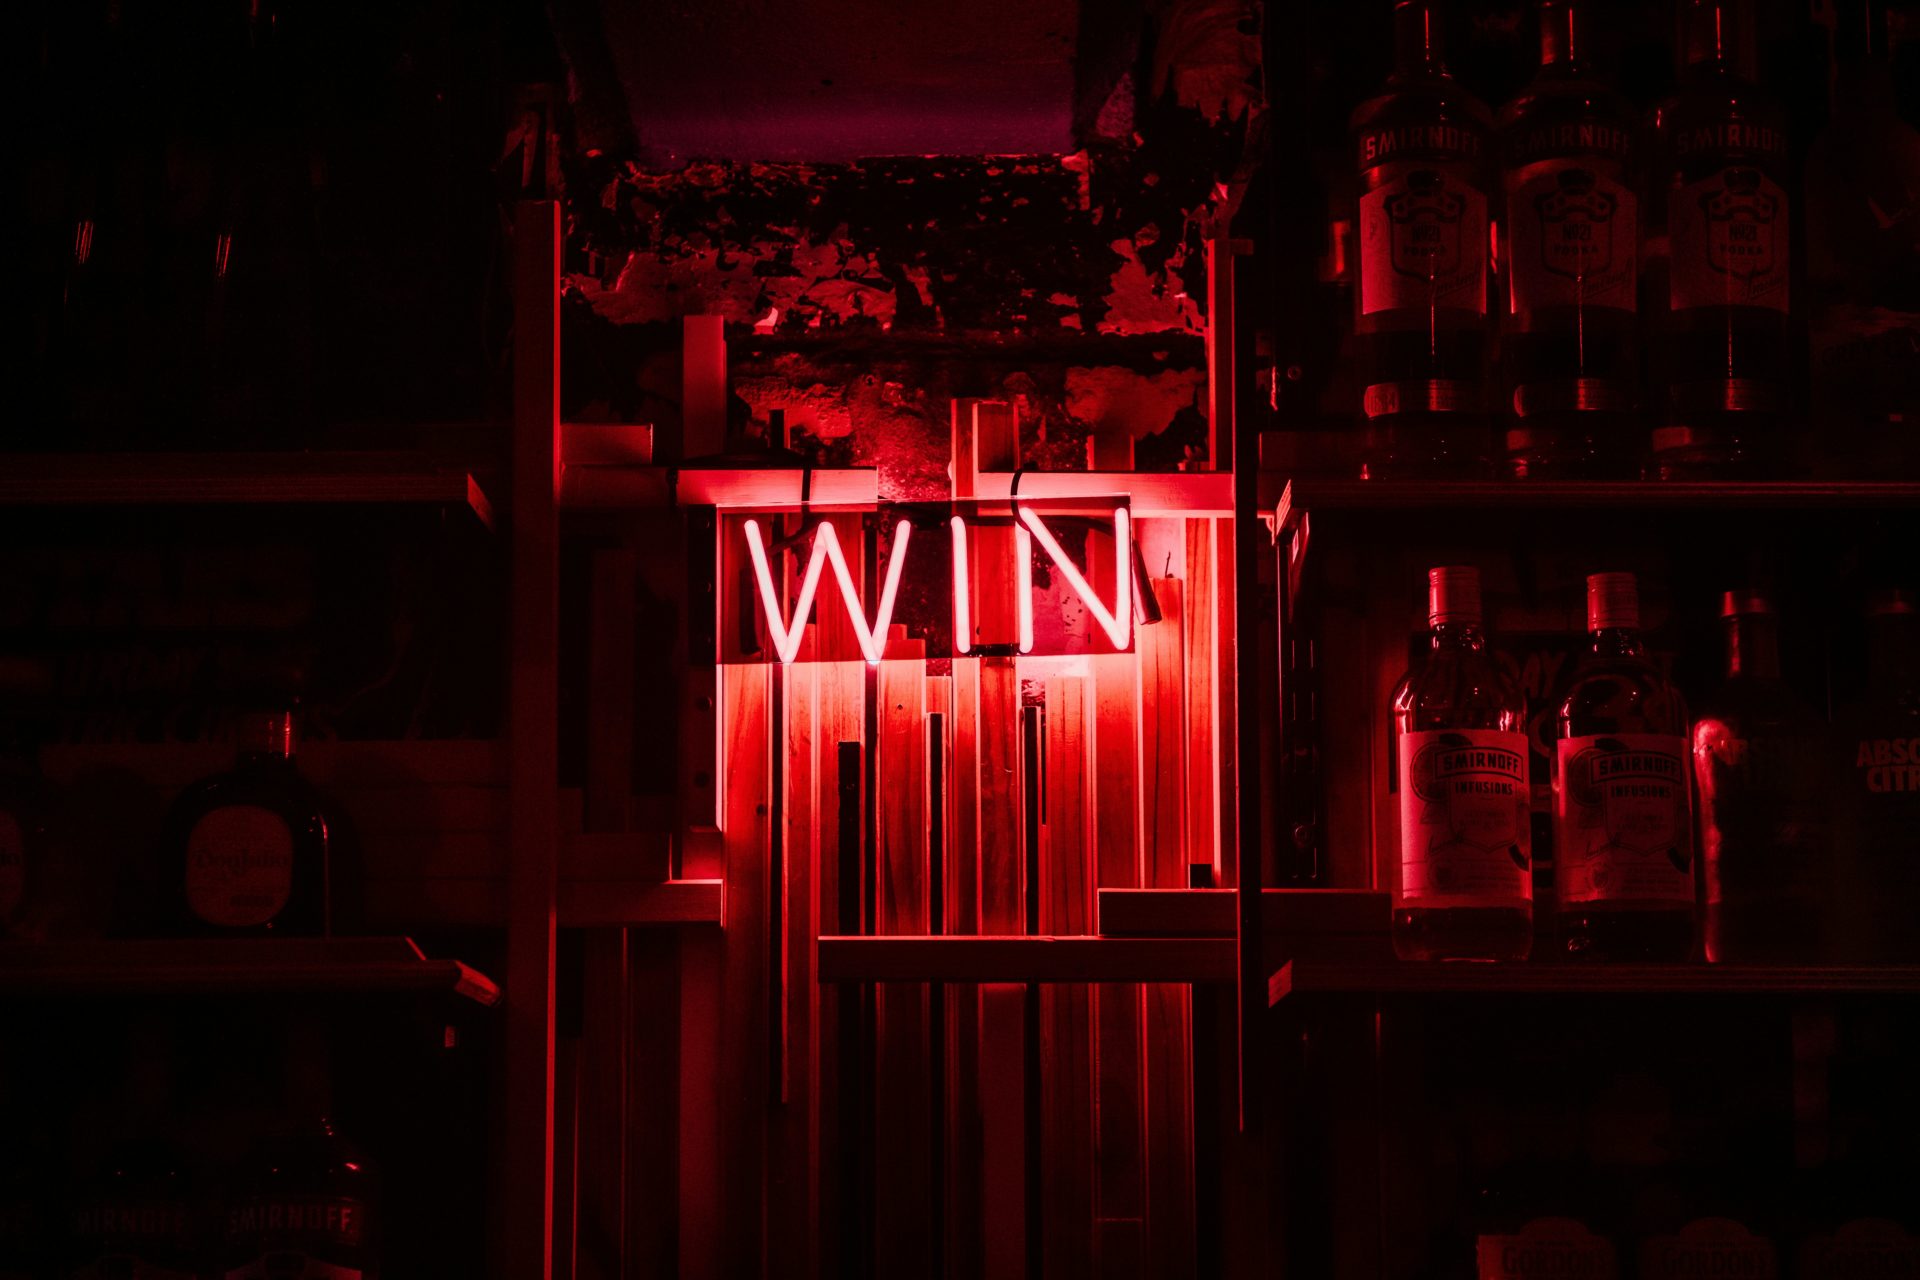 Neon sign that says "WIN"